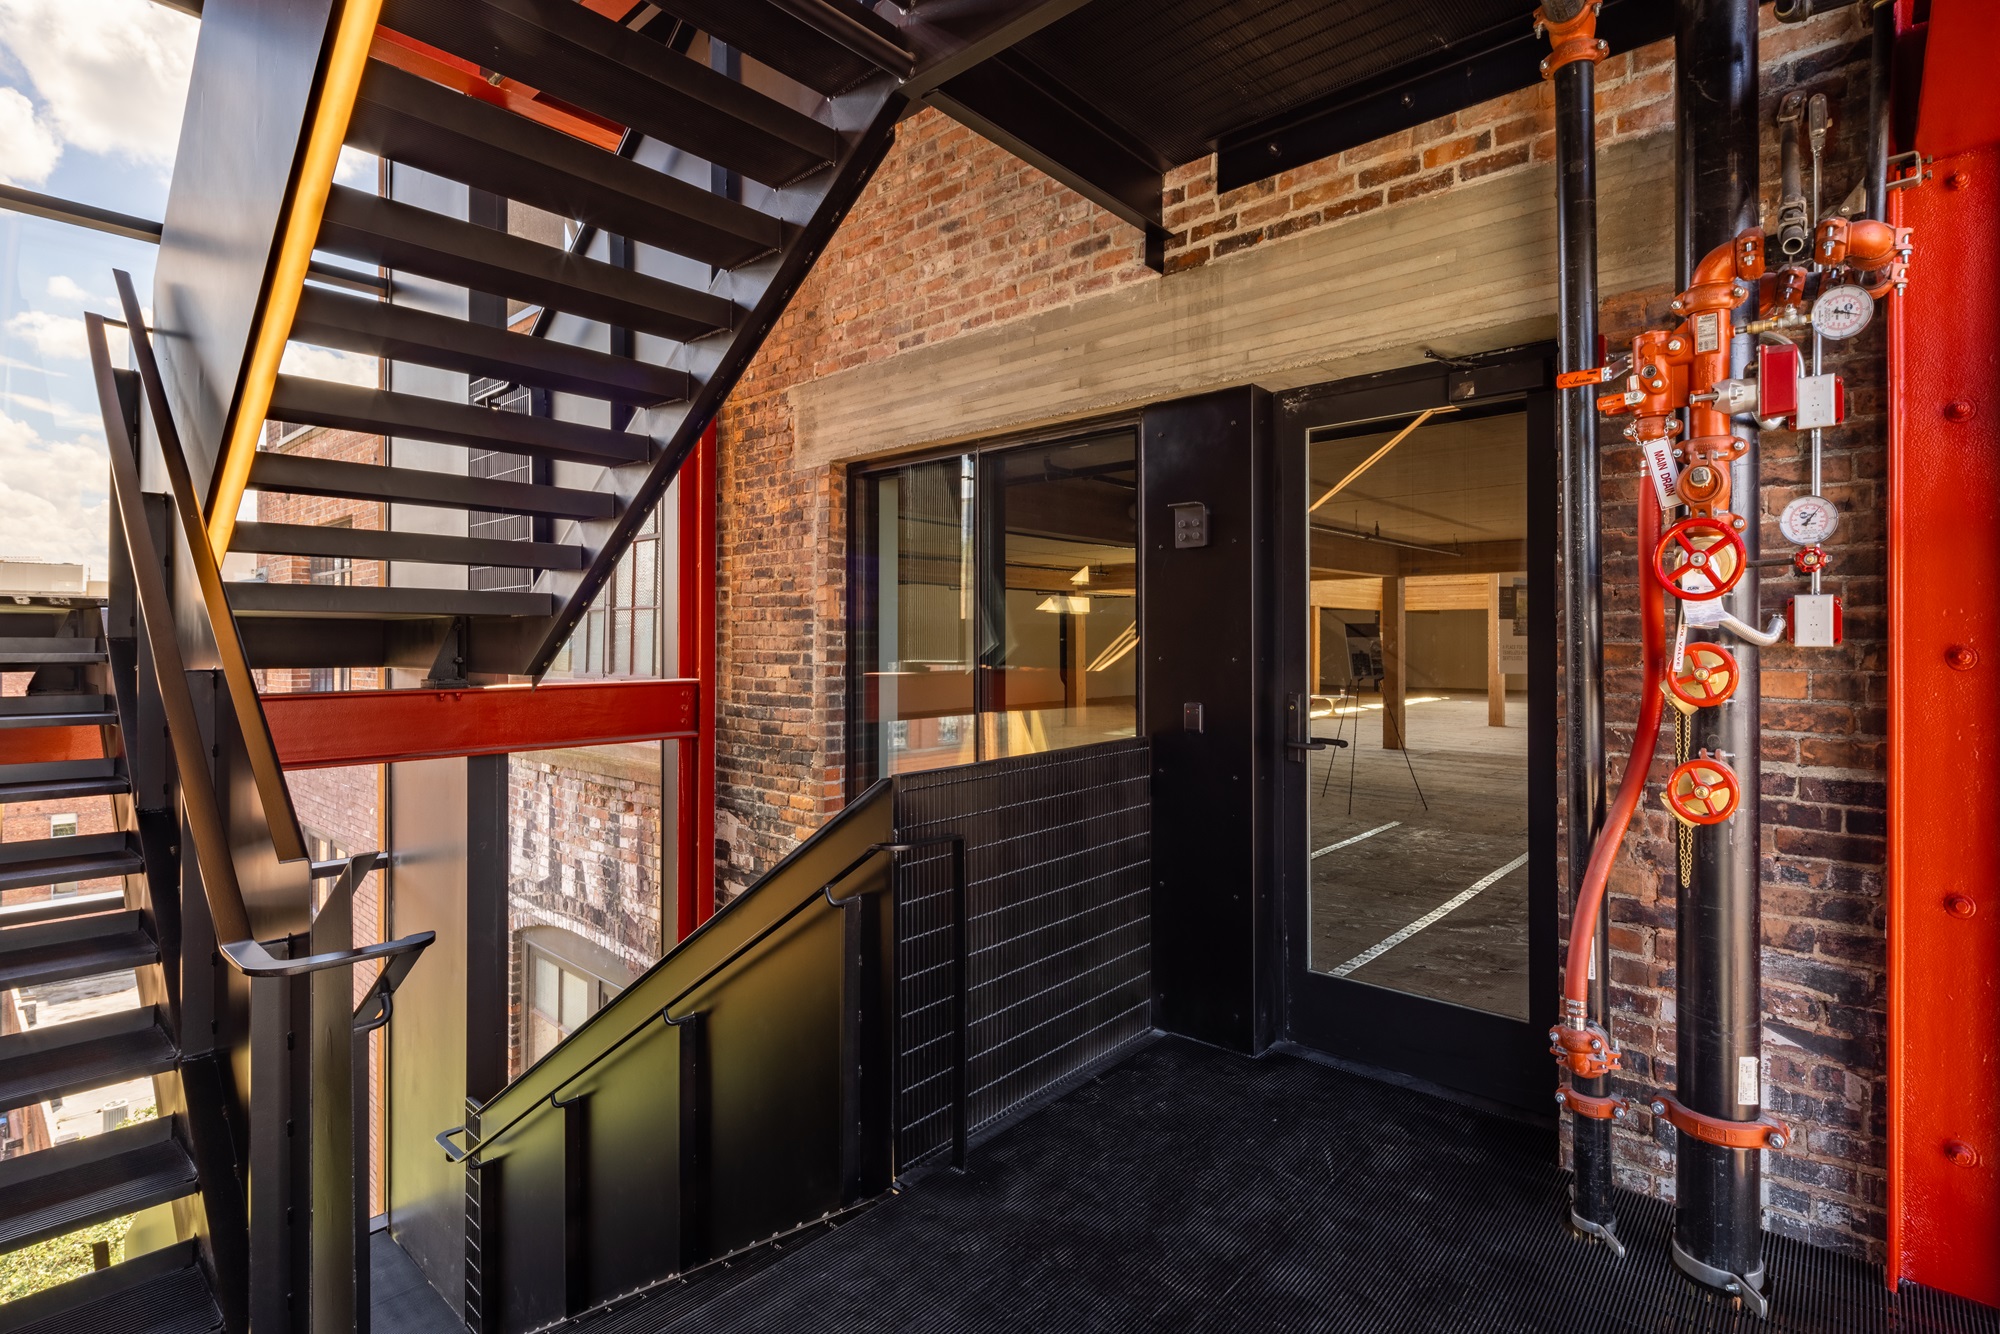 Narrow-profile, fire-rated frames support design cohesion in stairwells